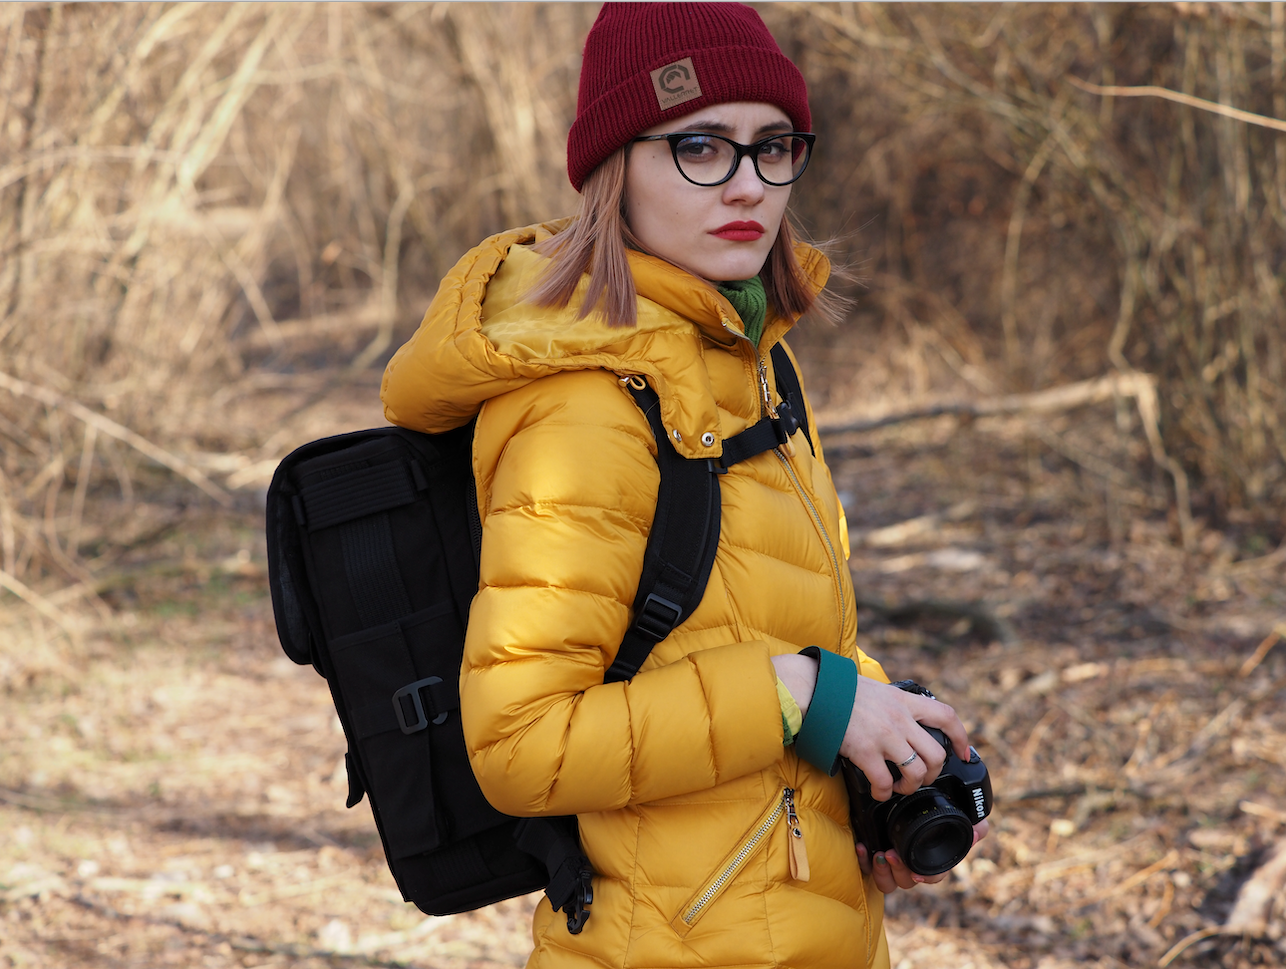 Retrospective Backpack 15 review by Stefan Constantin – Think Tank